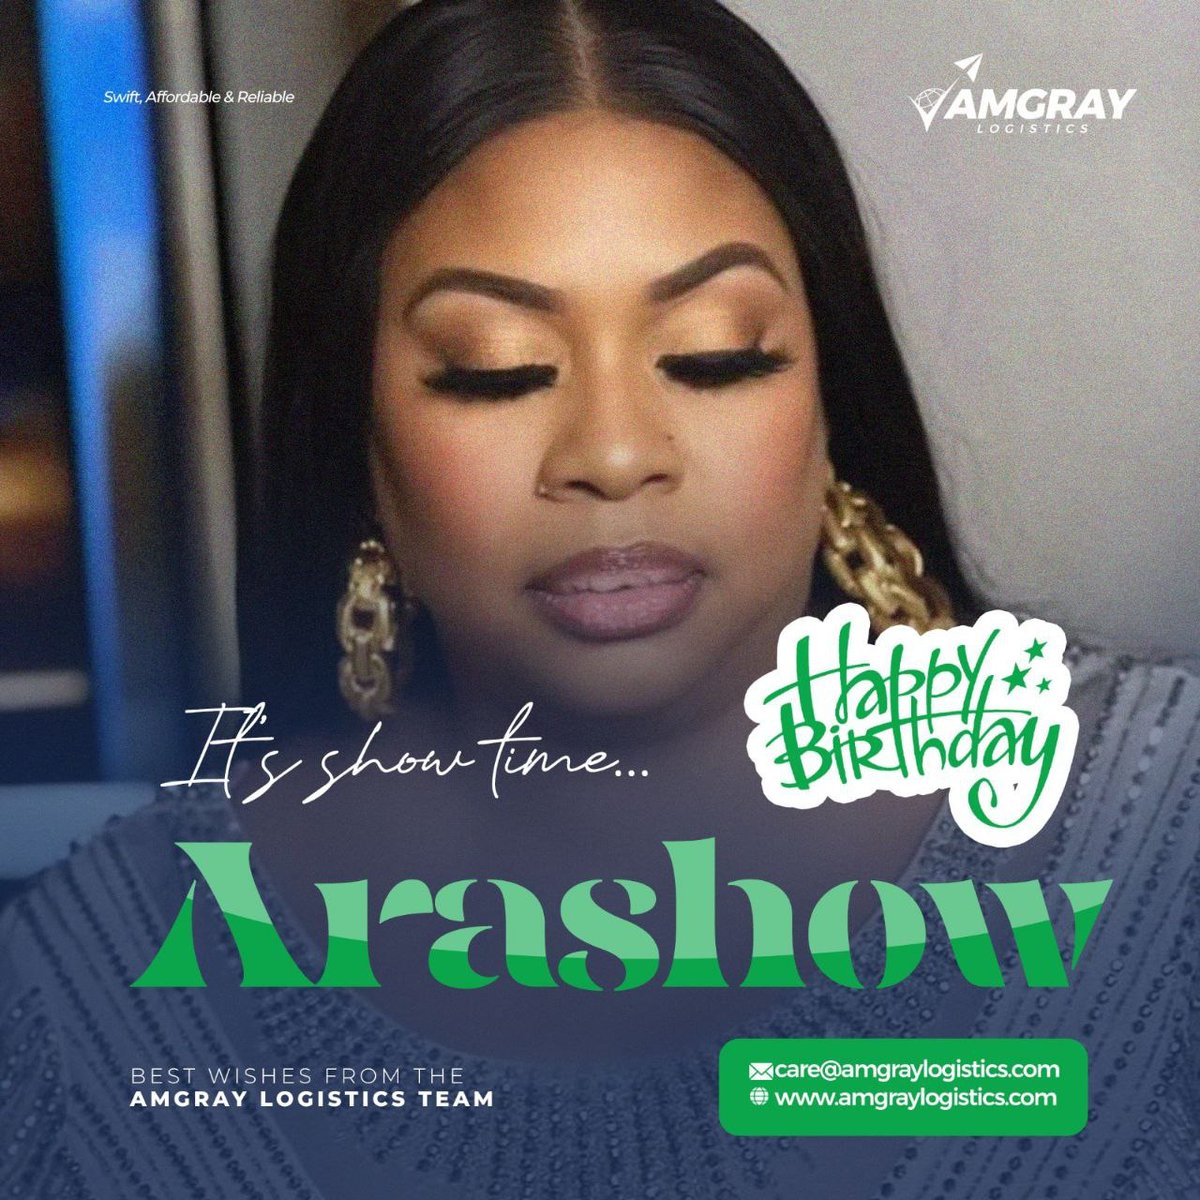 Let's roll out the red carpet for my dear friend ARASHOW who knows how to turn every day into a show-stopping event!

May your special day be filled with all the drama, excitement, and laughter you bring to our lives.

Happy Birthday 🎁🎈

#arashow #happybirthday #amgraylogistics